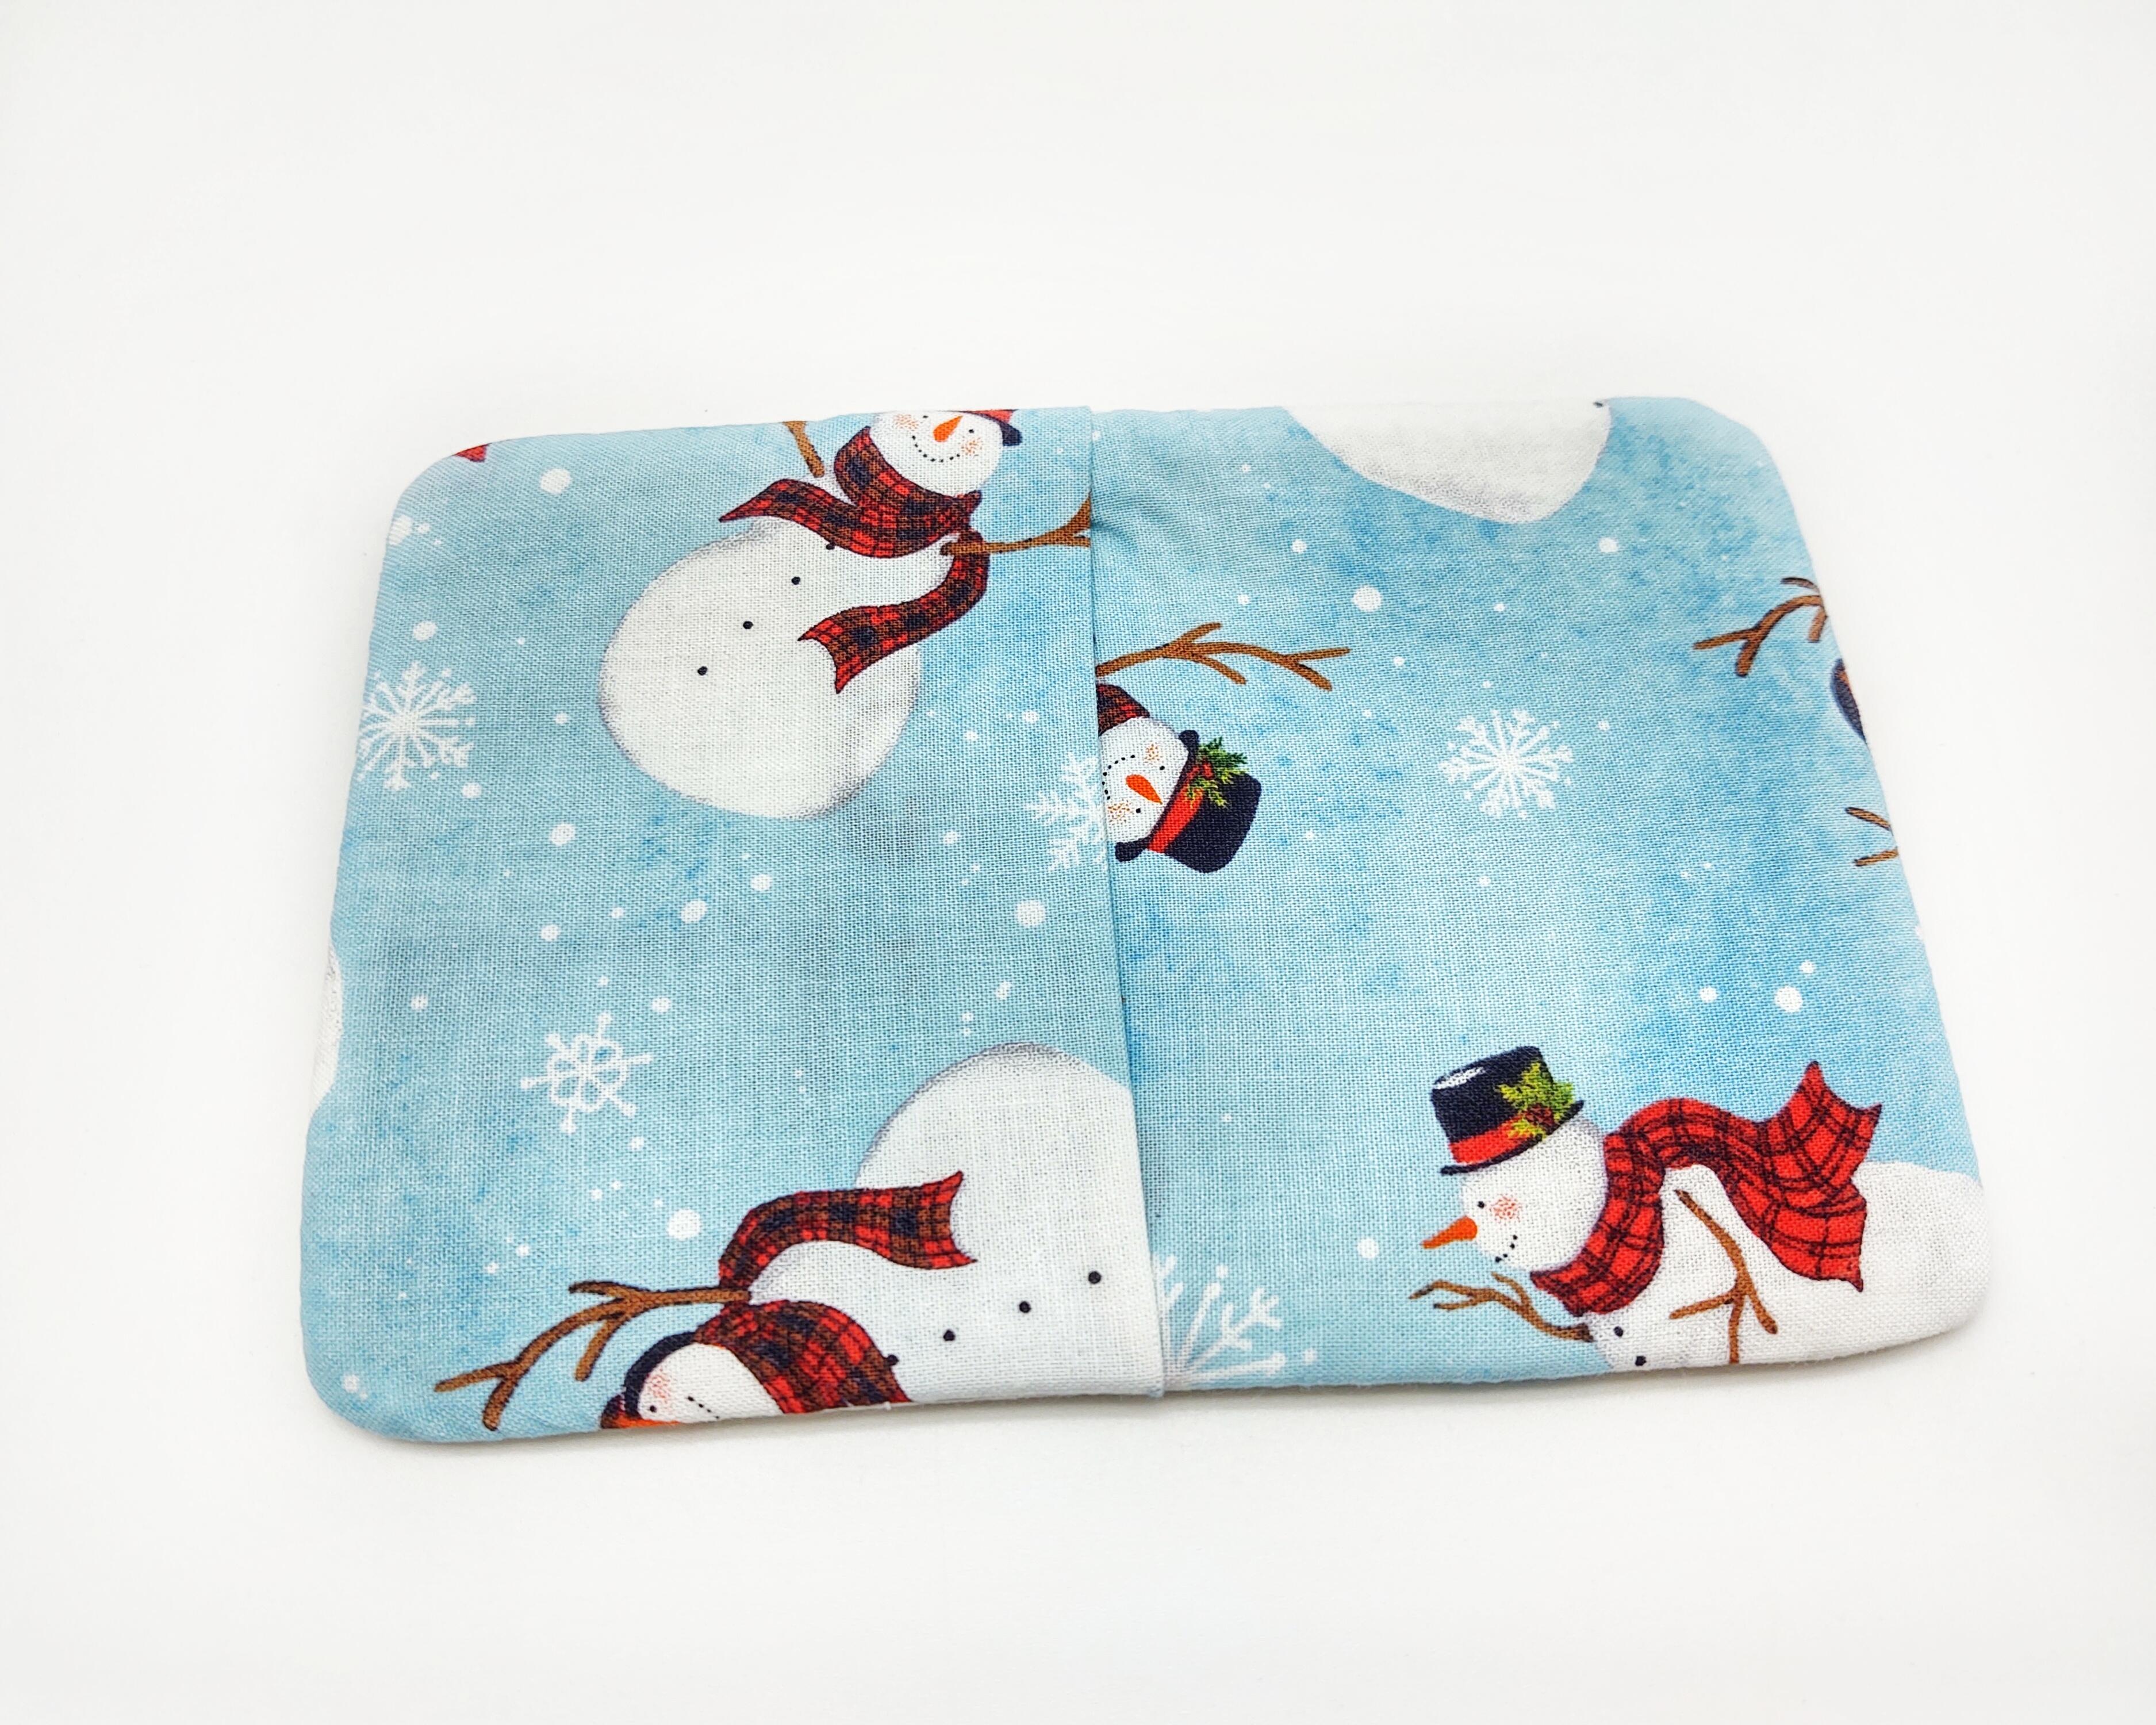 Back is the same snowman print and is an envelope closure.